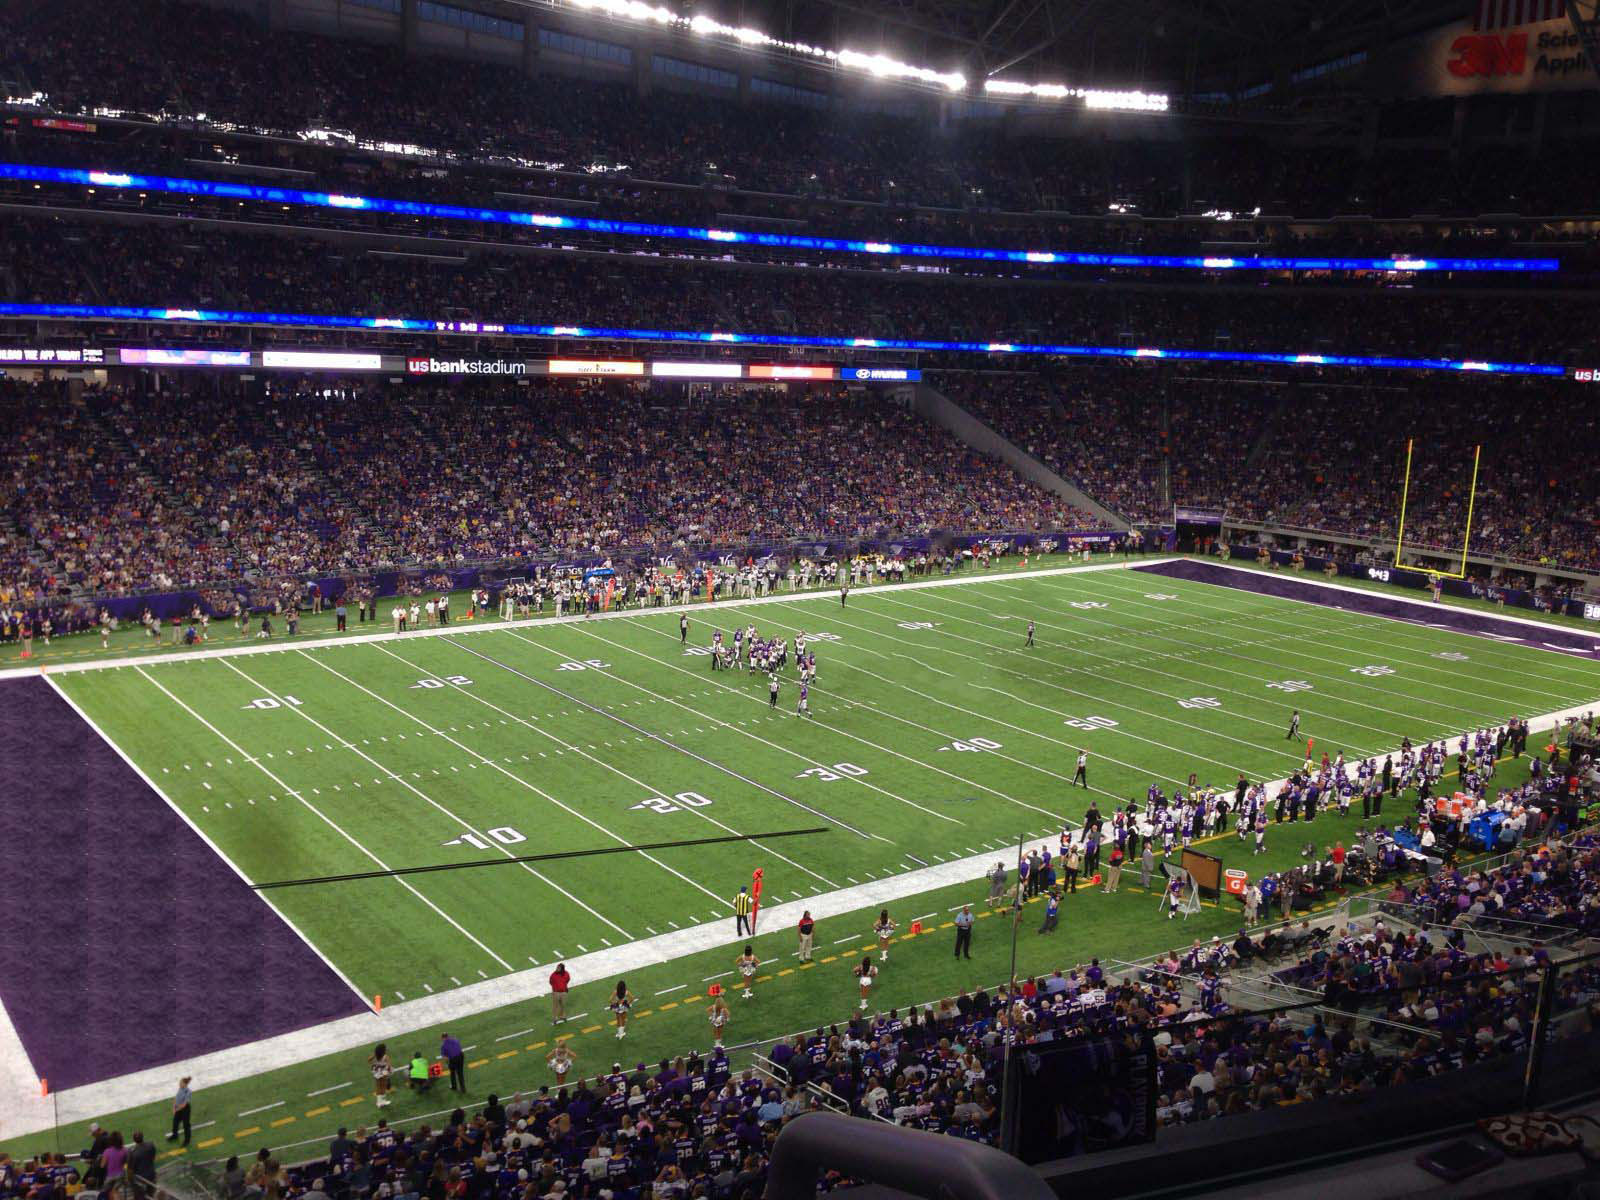 section 240, row 2 seat view  for football - u.s. bank stadium